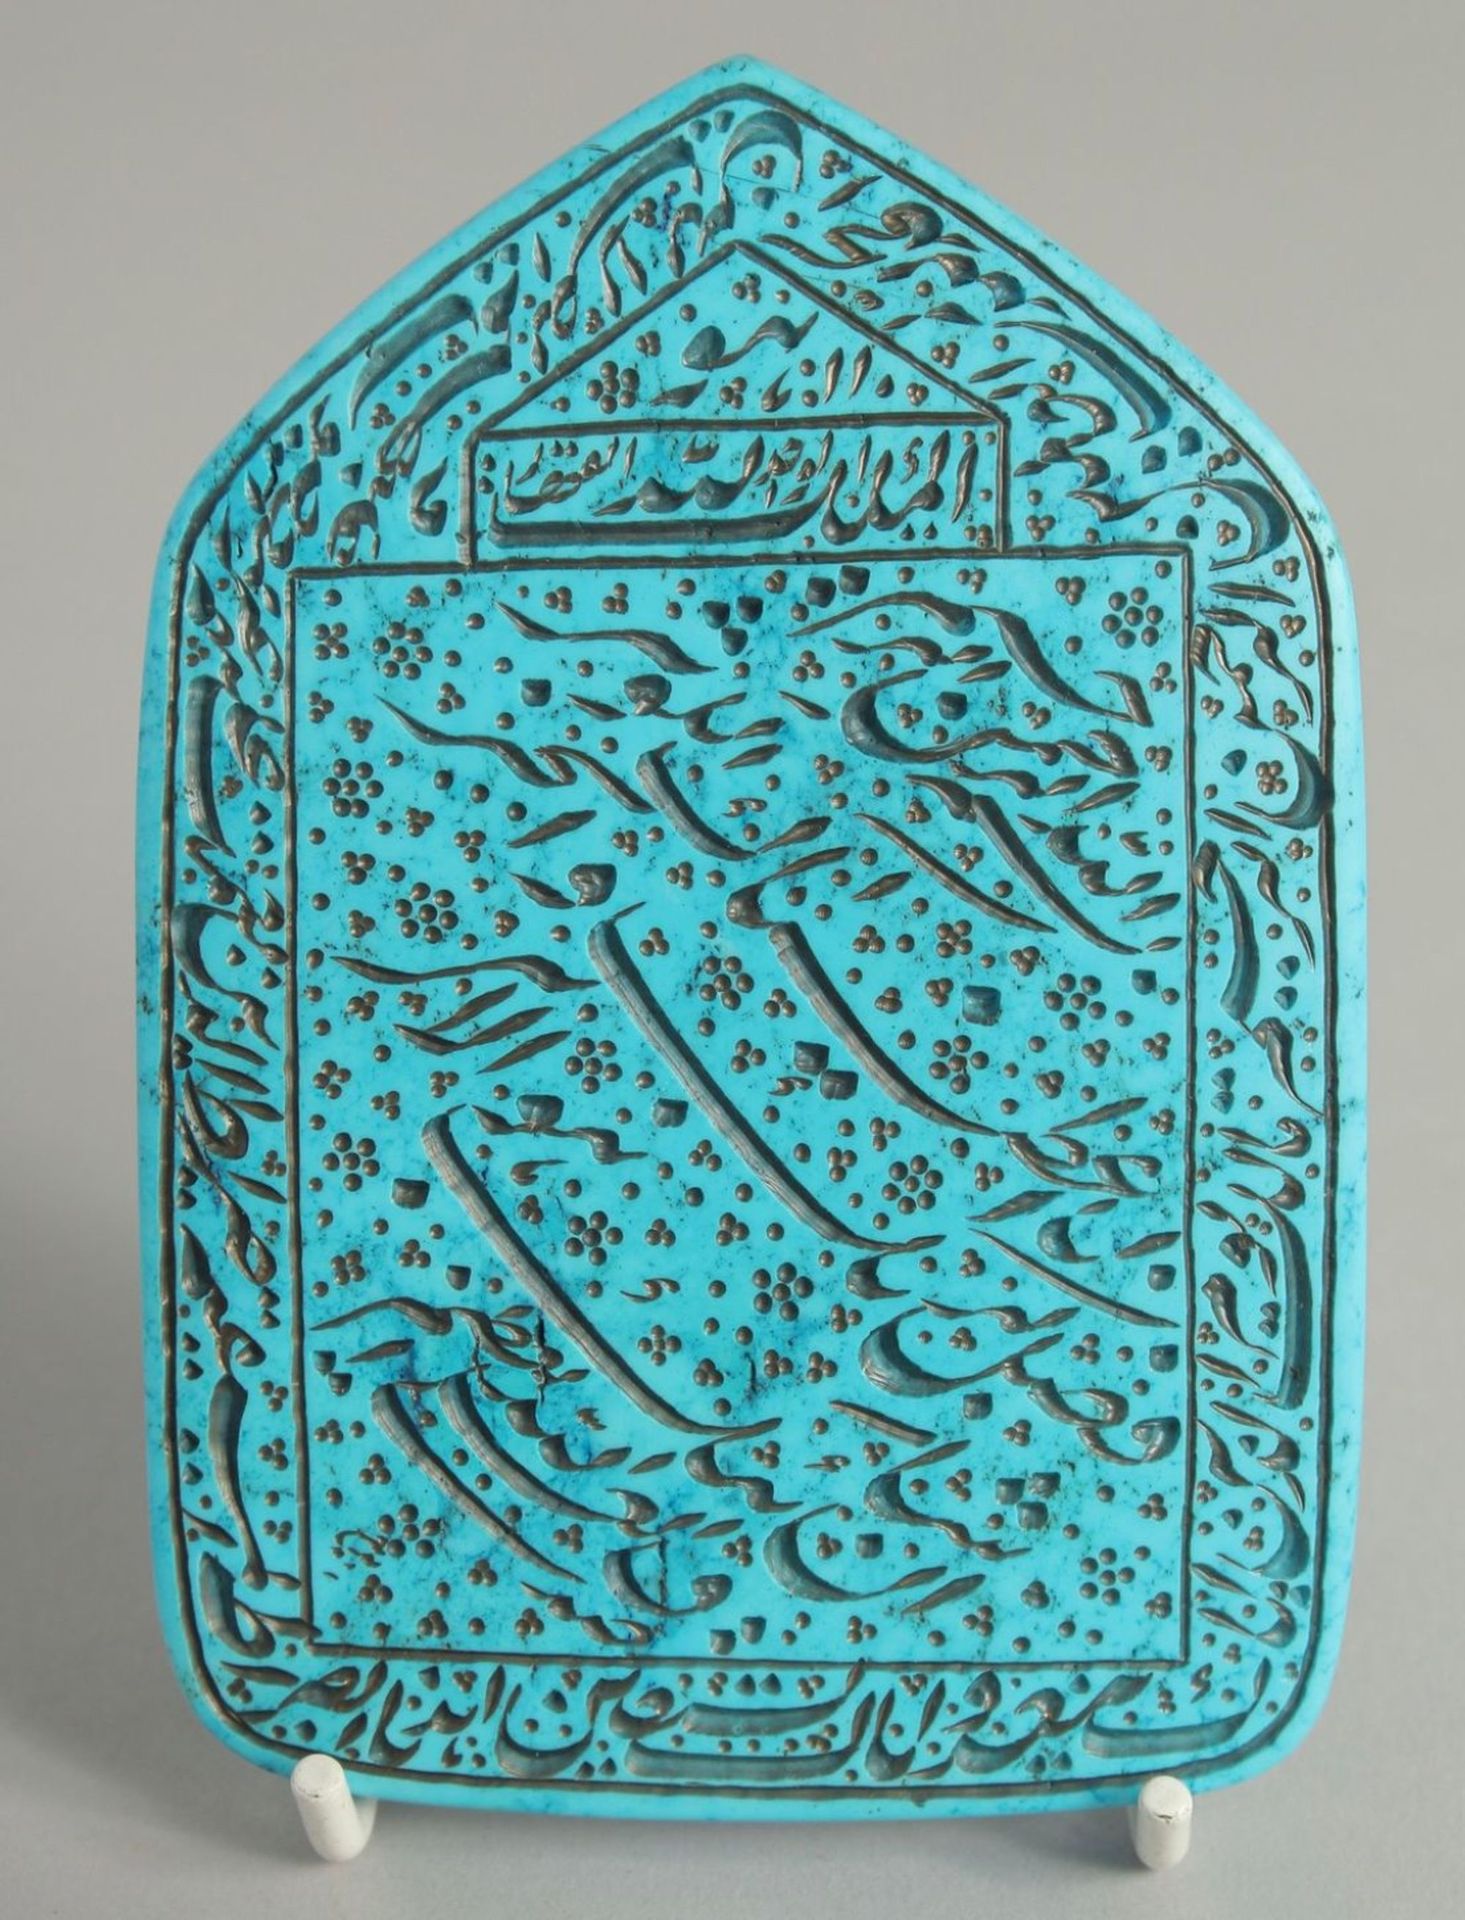 A PERSIAN TURQUOISE STONE CARVED SEAL, QAJAR EARLY 20TH CENTURY 绿松石Mihraab形状的印章，&hellip;